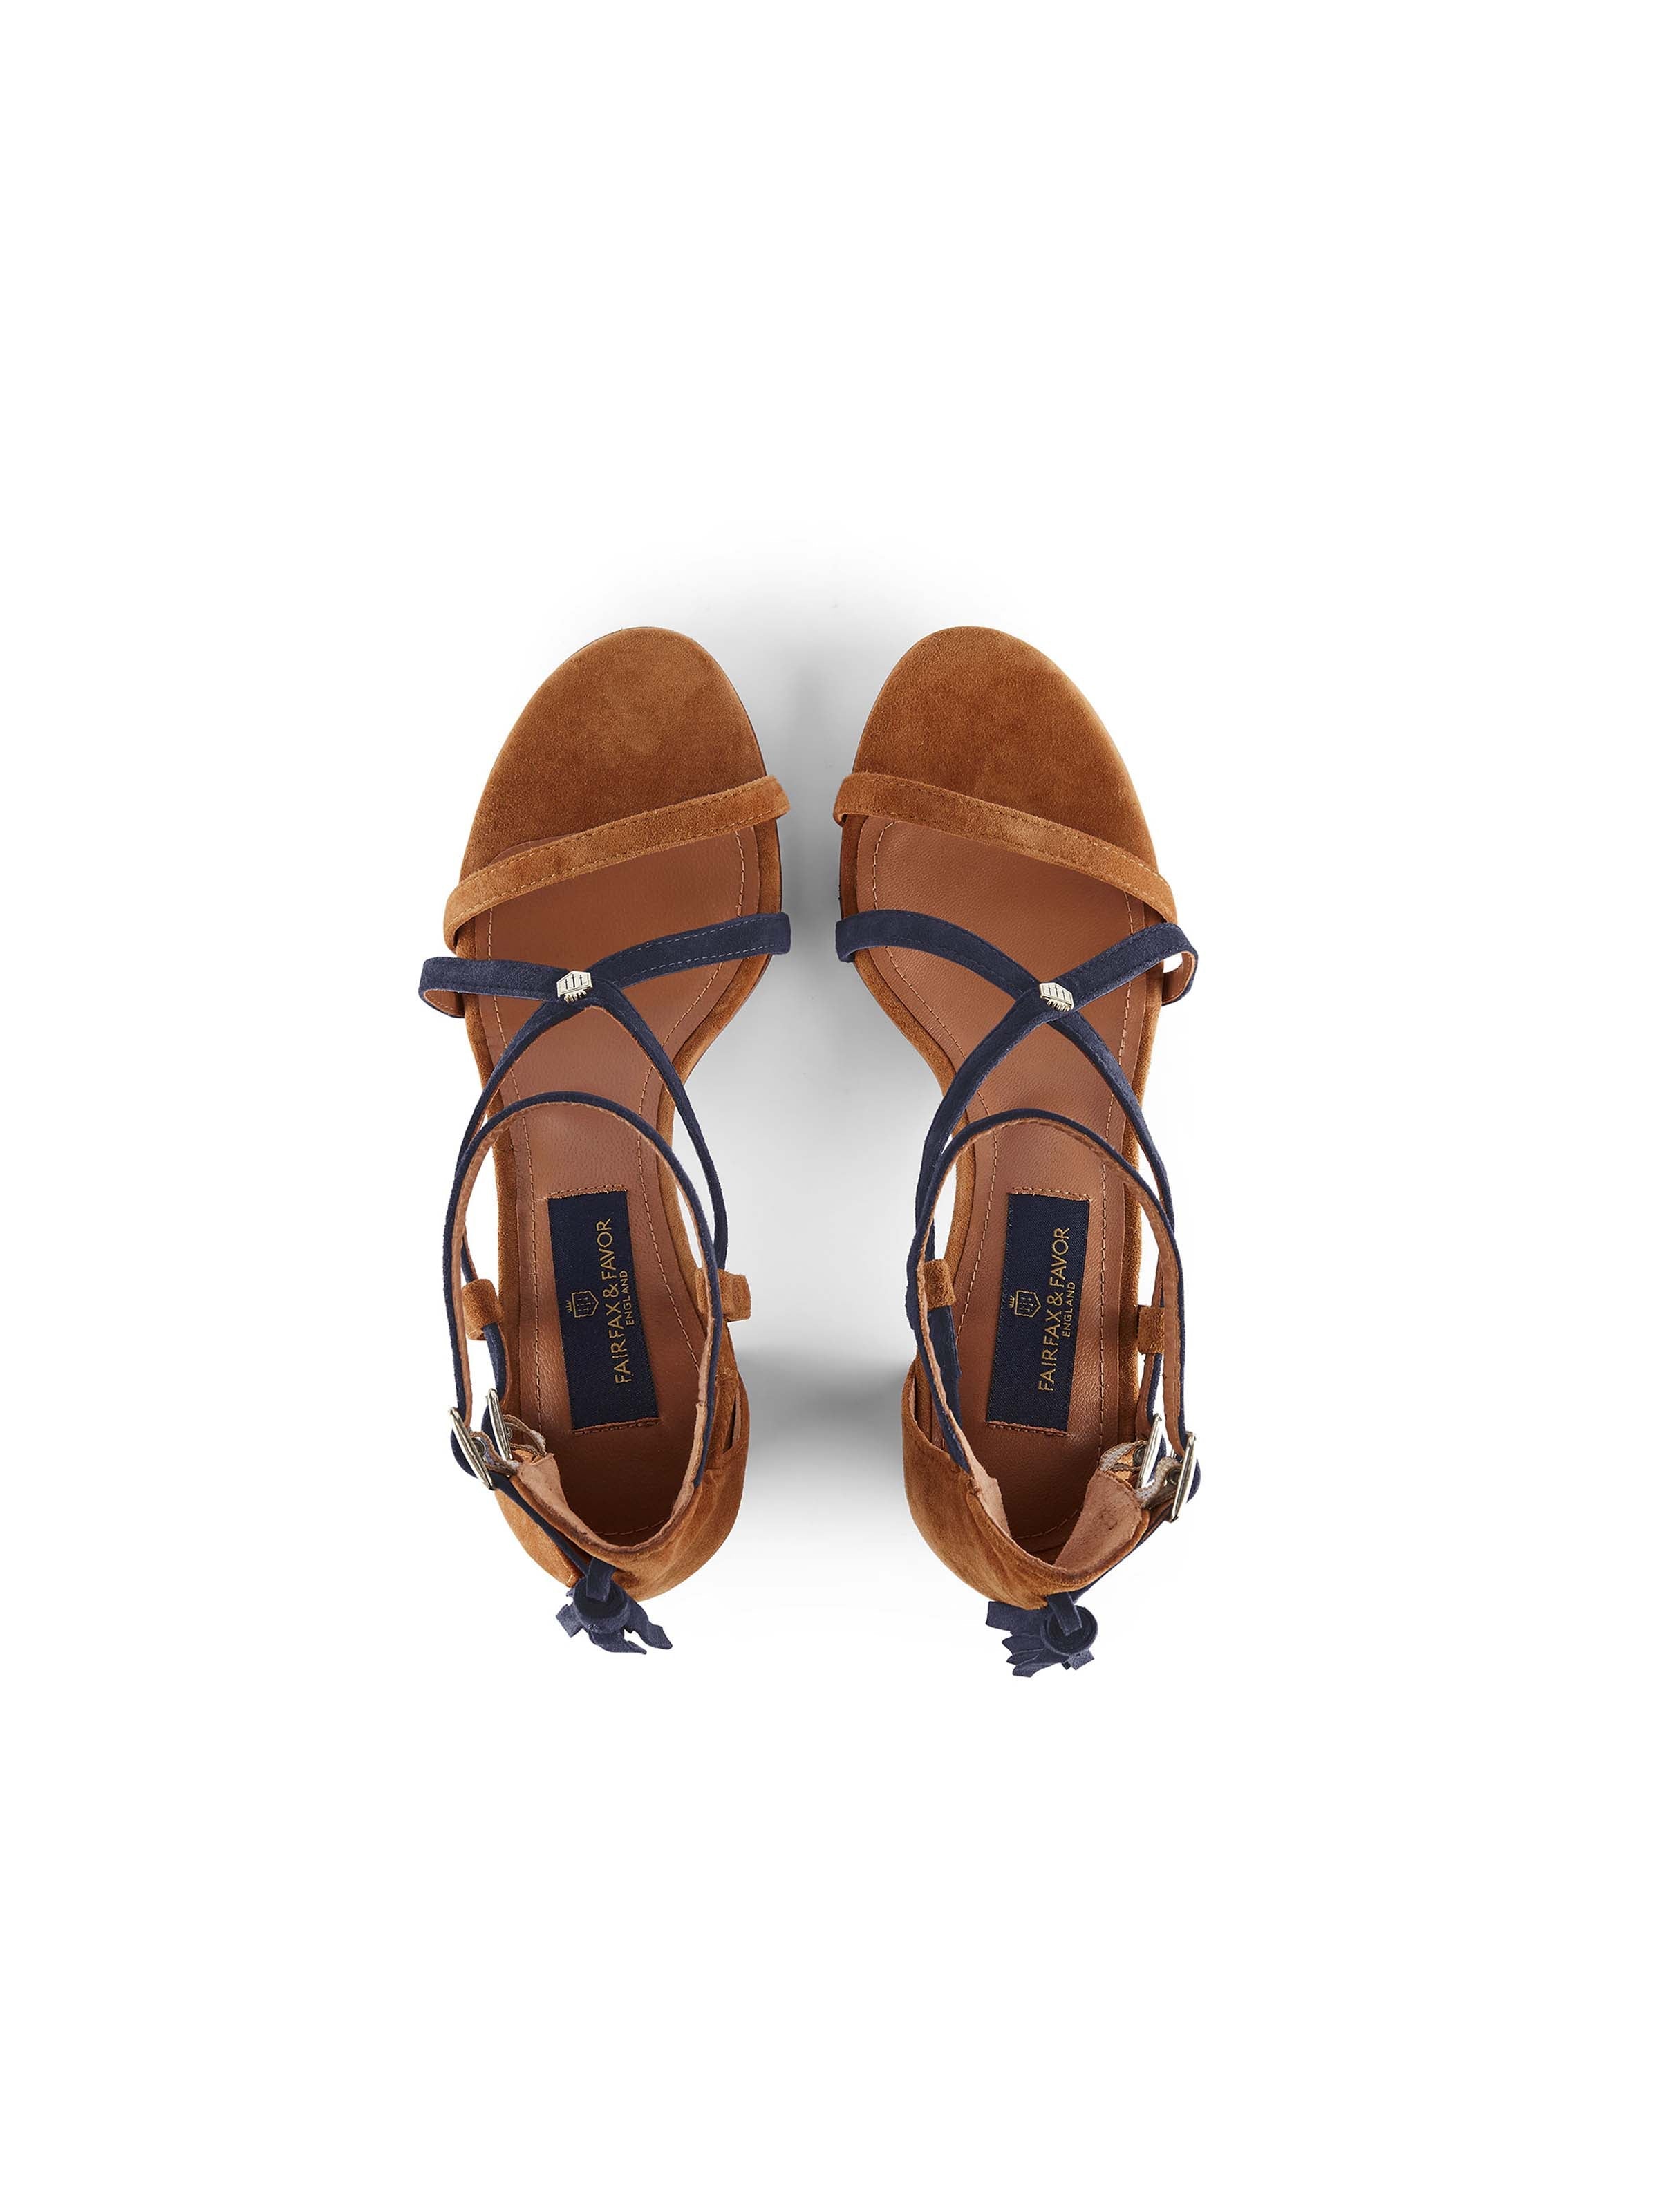 The Heeled Brancaster Sandal - Tan & Navy Suede